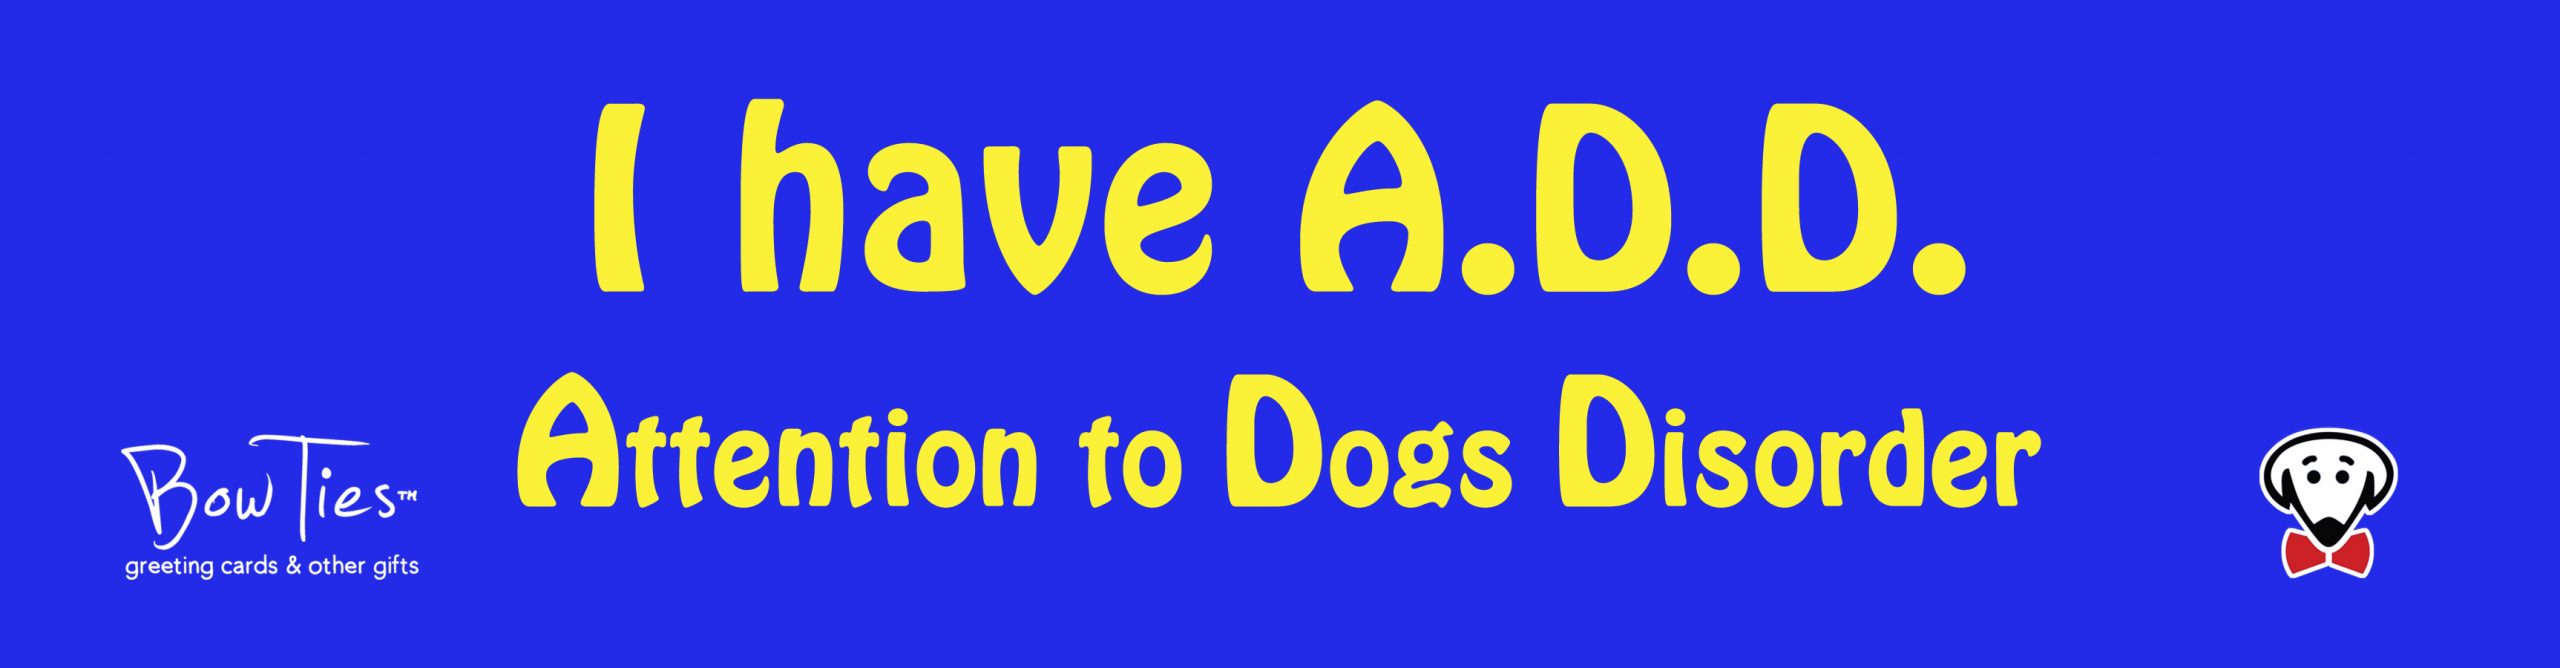 I have A.D.D. Attention to Dogs Disorder. – sticker